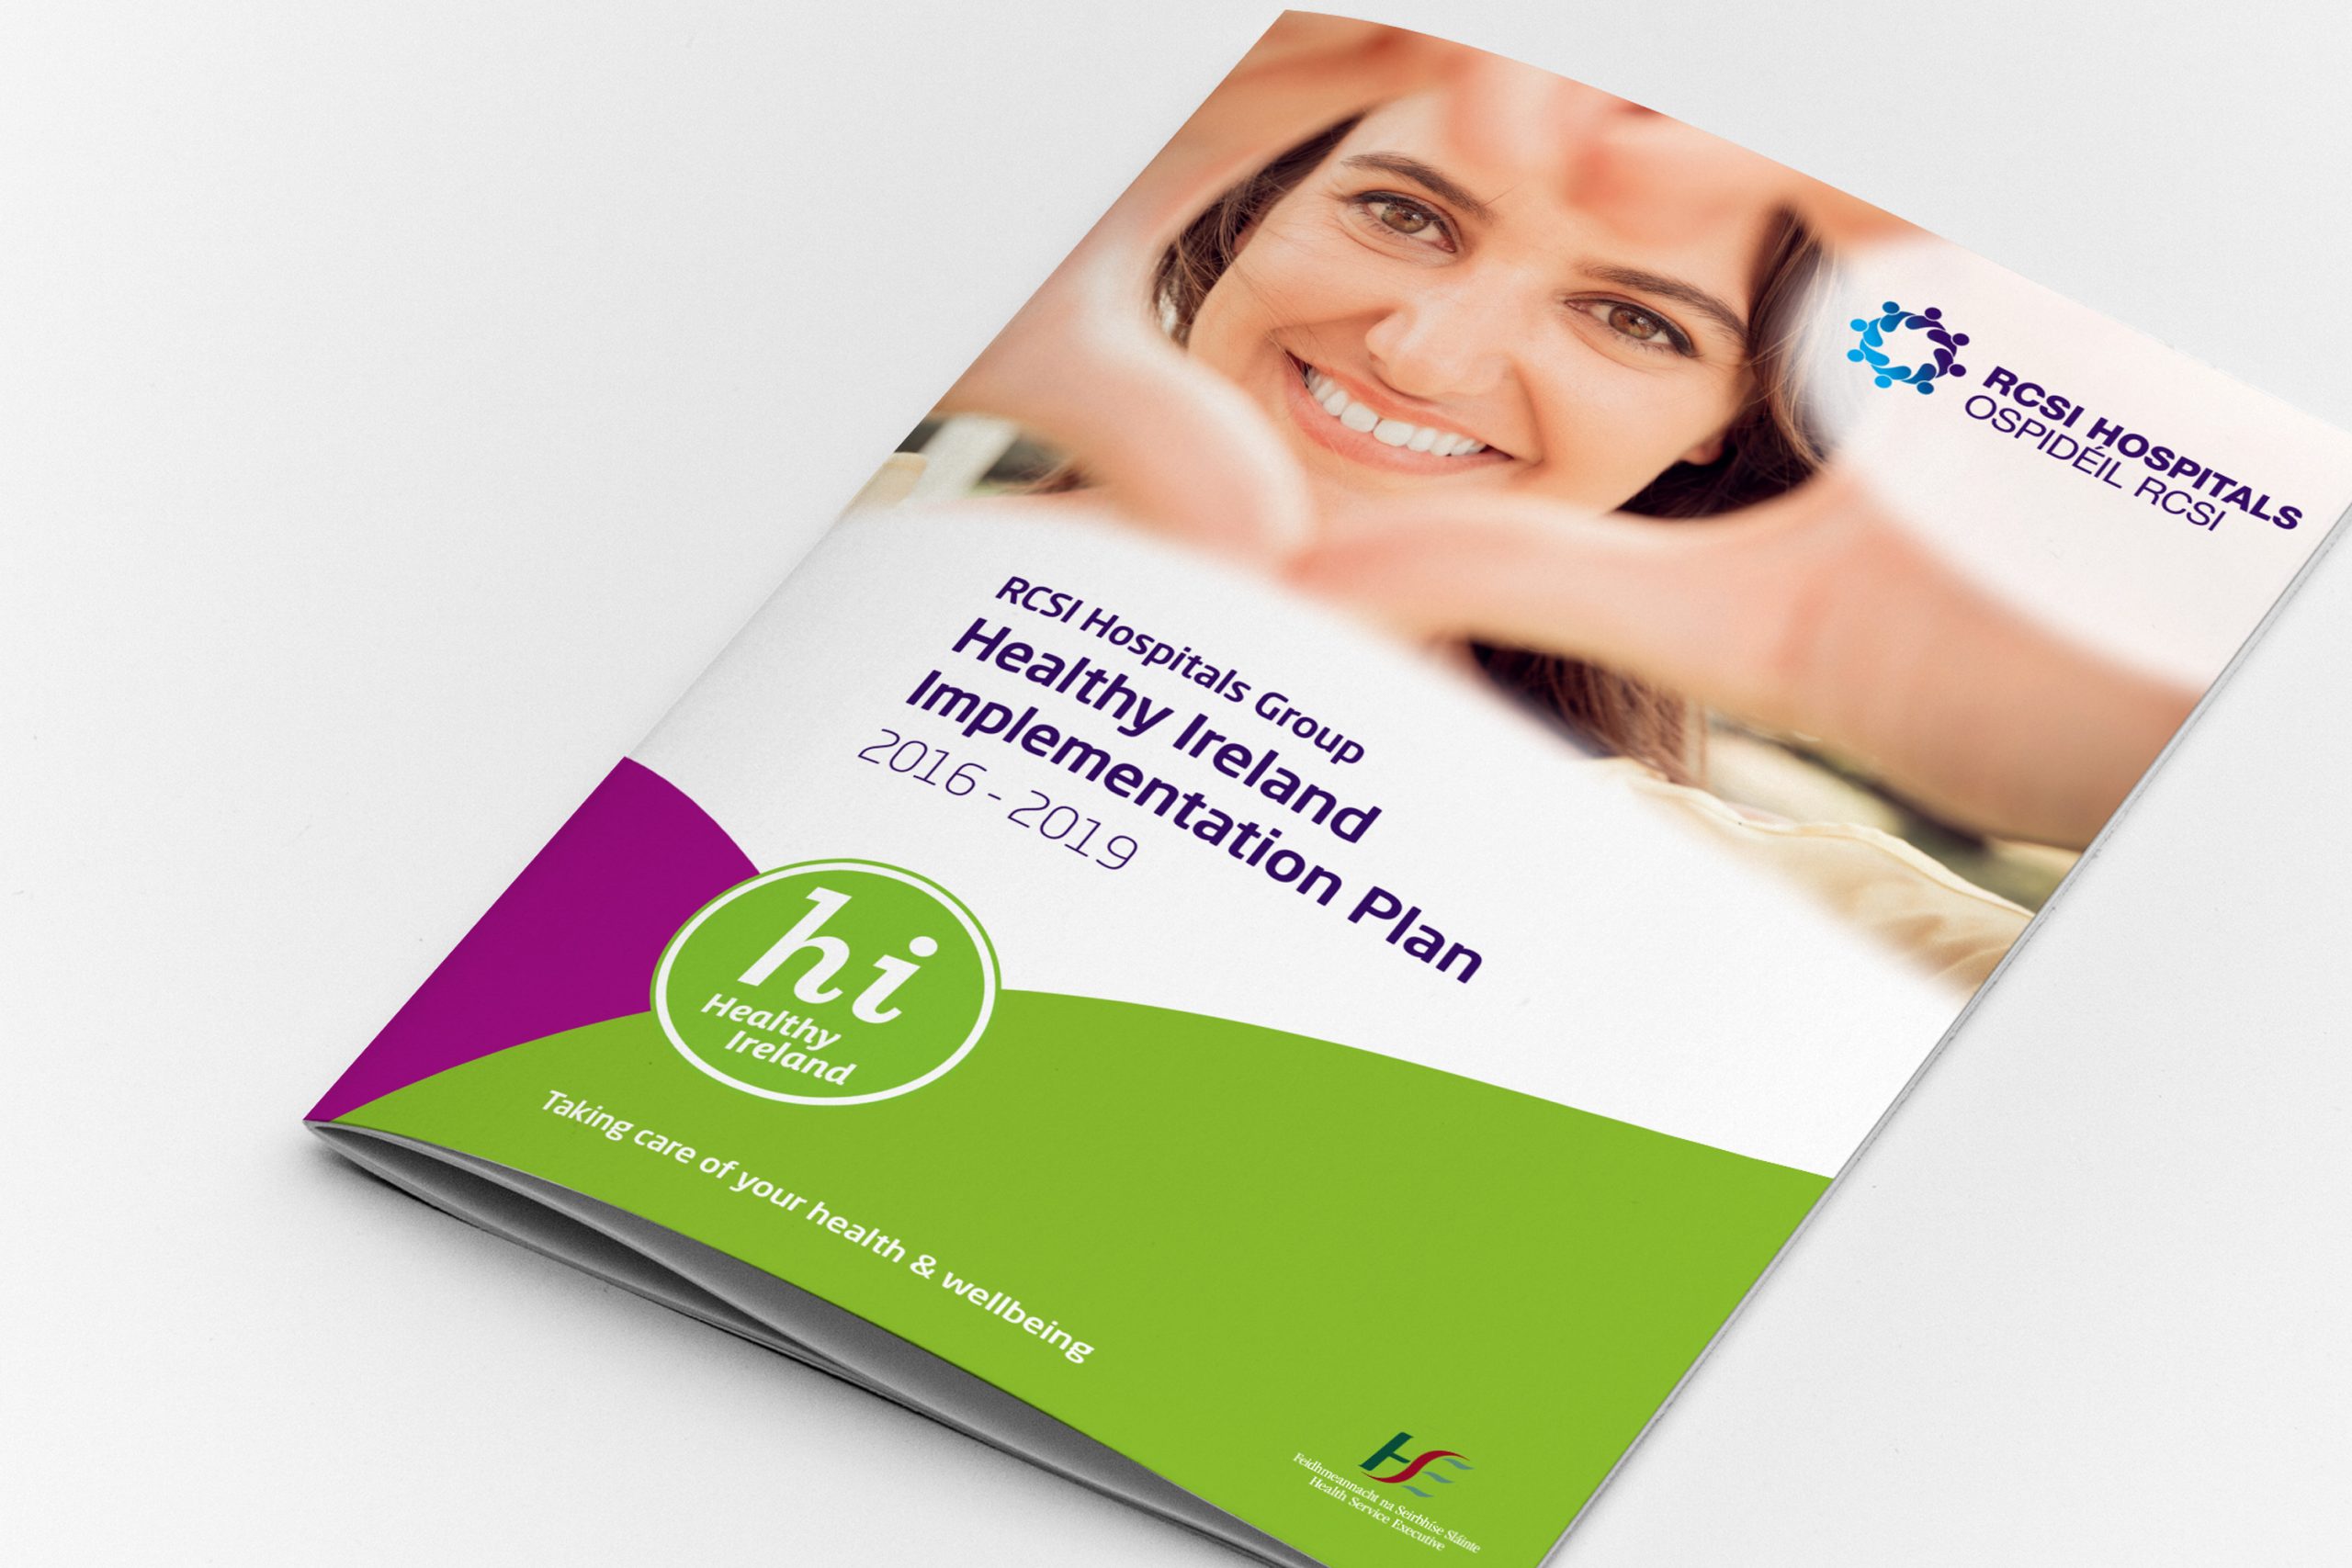 report cover showing a women smiling with her hands making a heart symbol